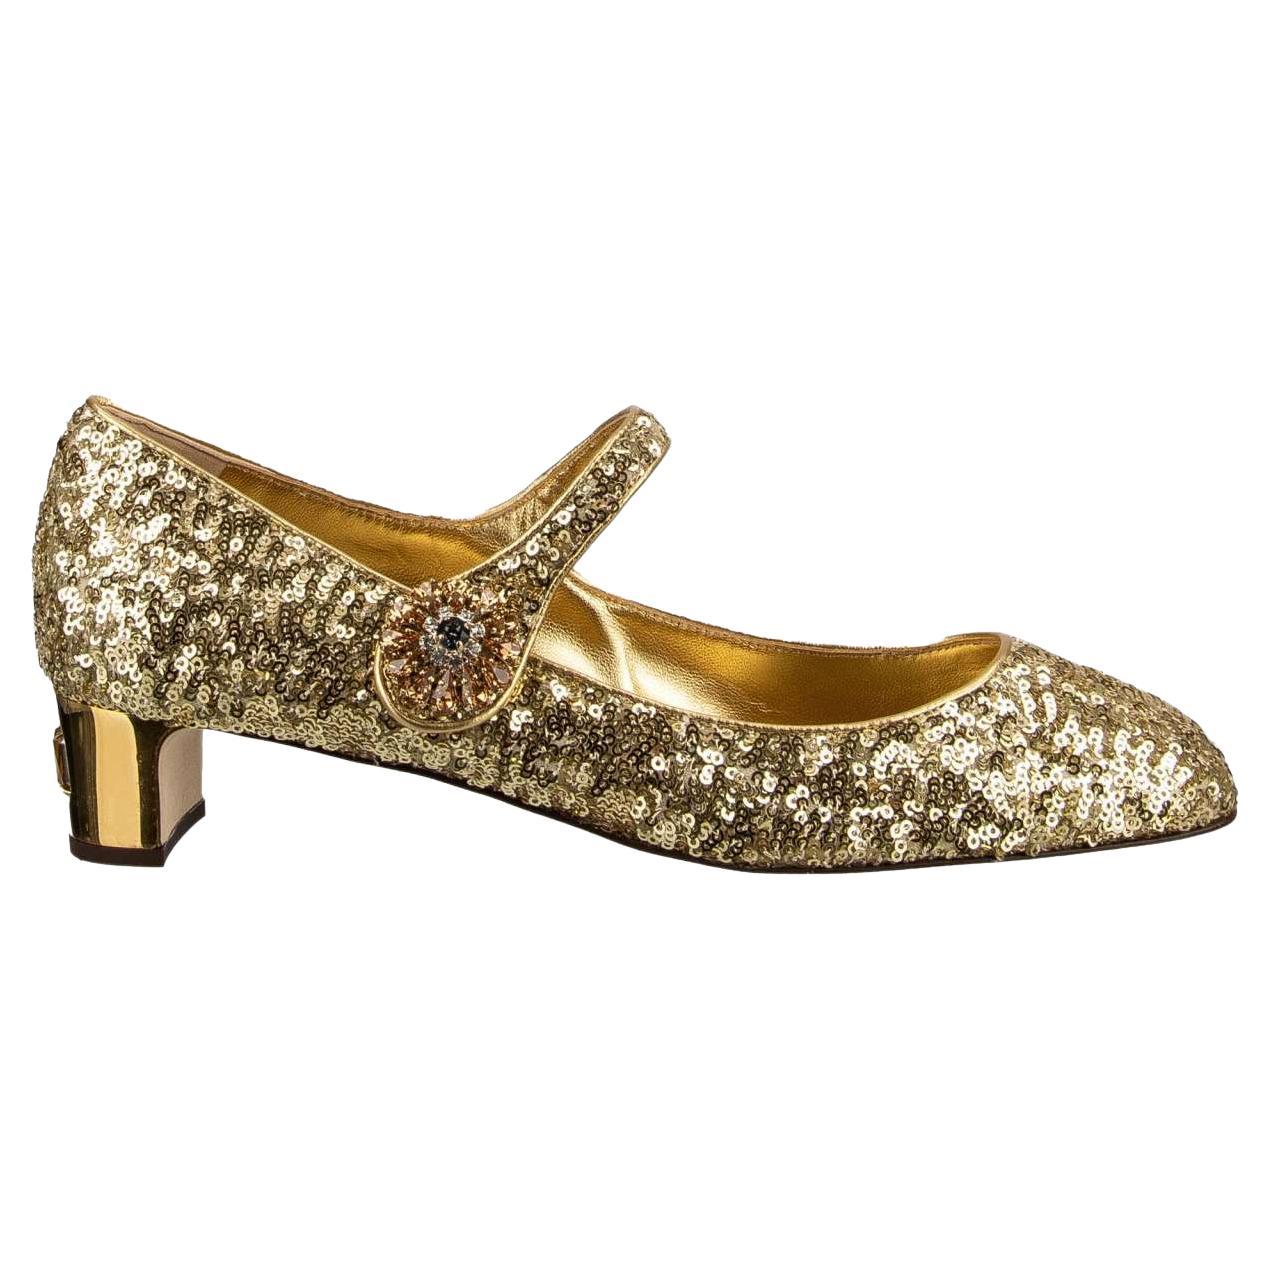 Dolce & Gabbana - Sequin Crystal Heels Mary Jane Pumps VALLY Gold 40 US 10 For Sale